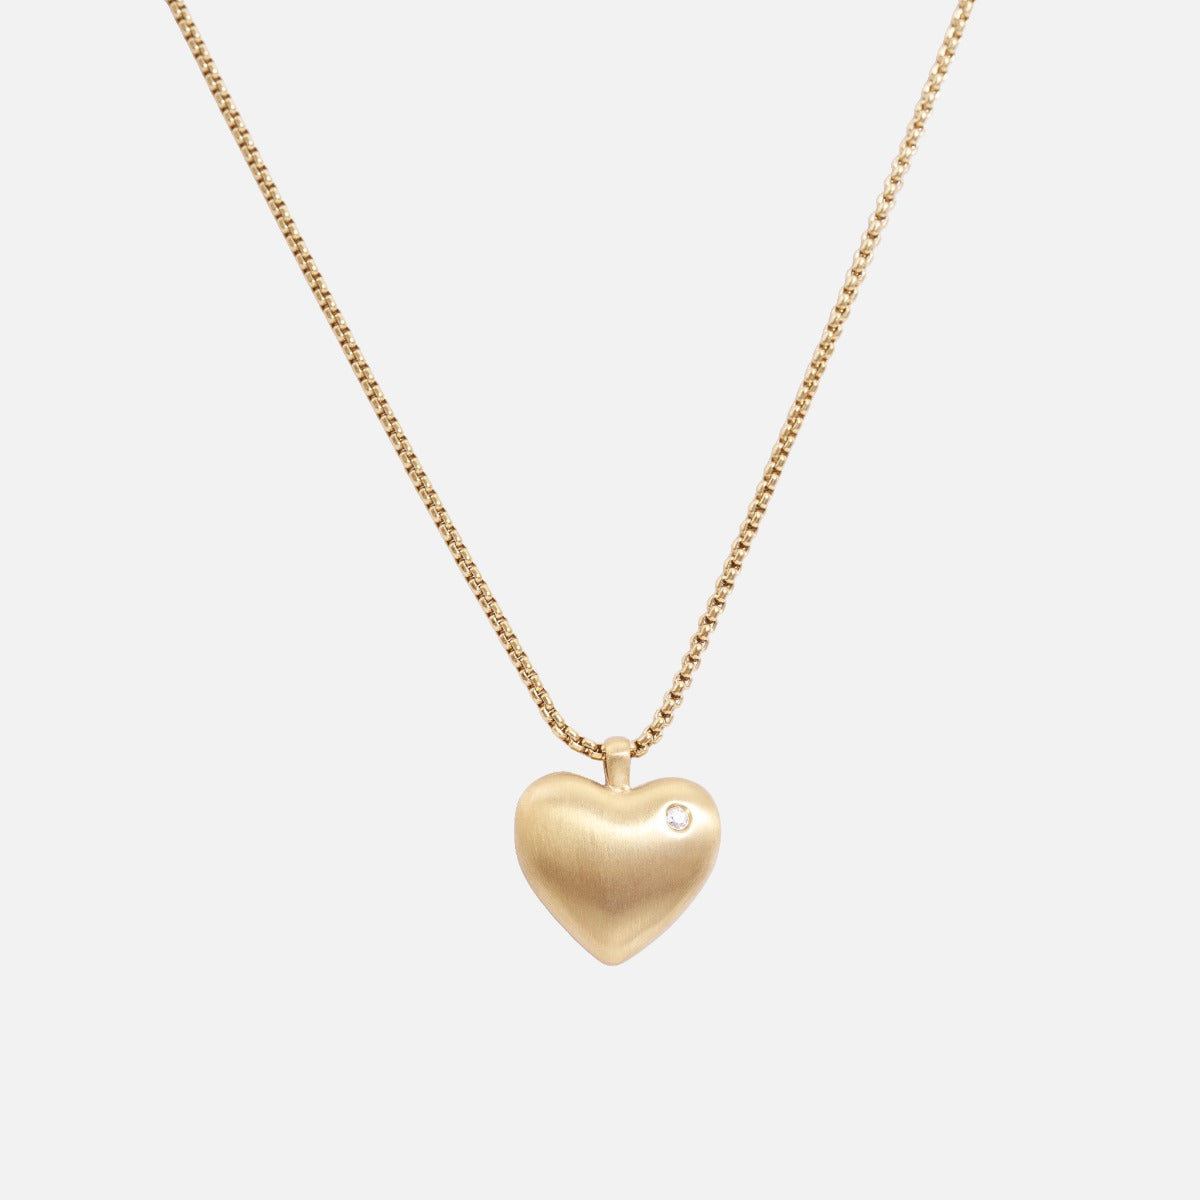 Golden stainless steel pendant with heart and small cubic zirconia stone